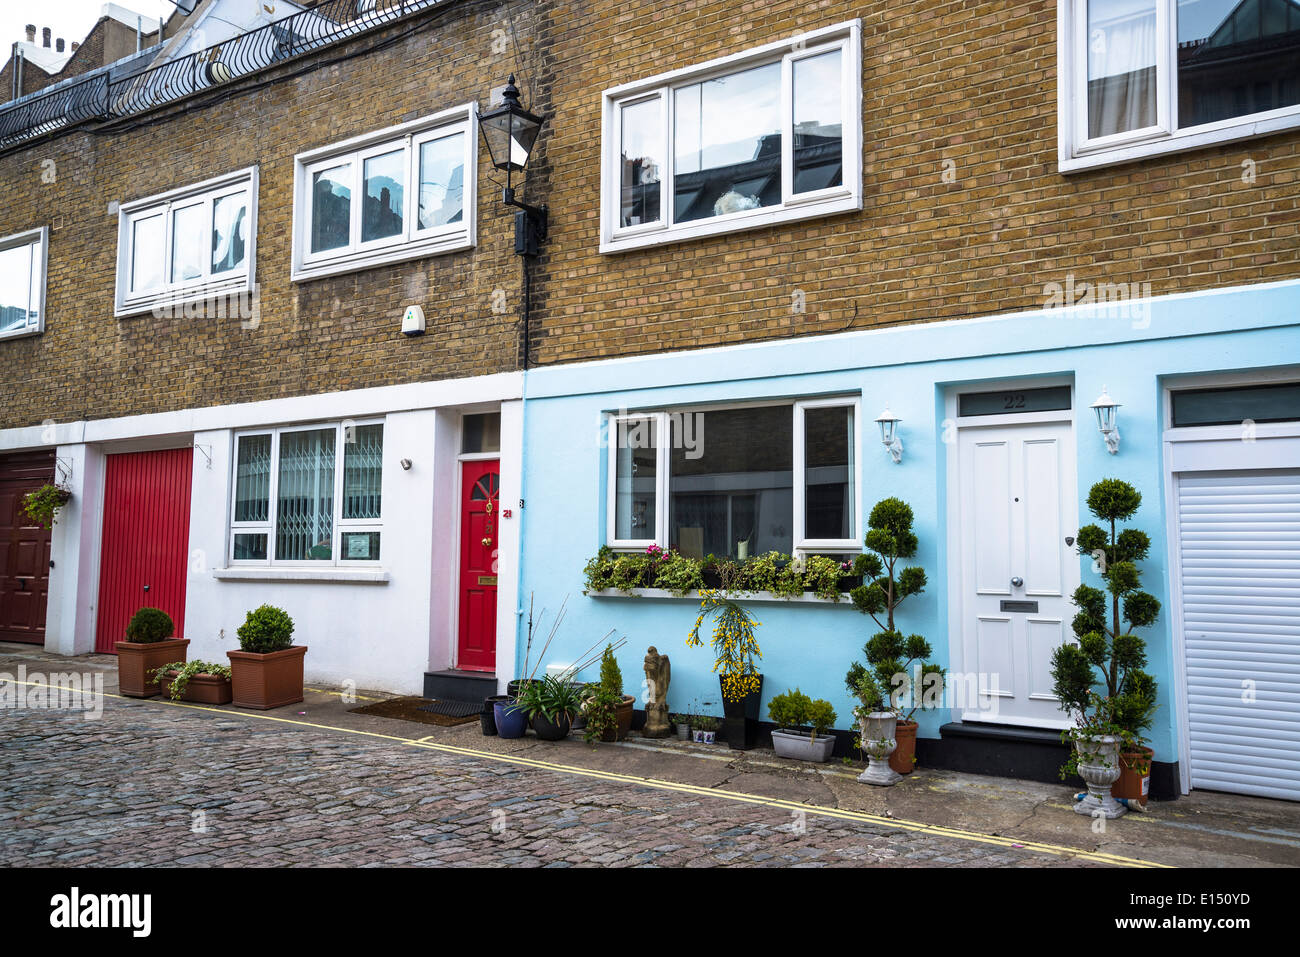 Queen's Mews, Princes Square, City of Westminster, London W2, Regno Unito Foto Stock